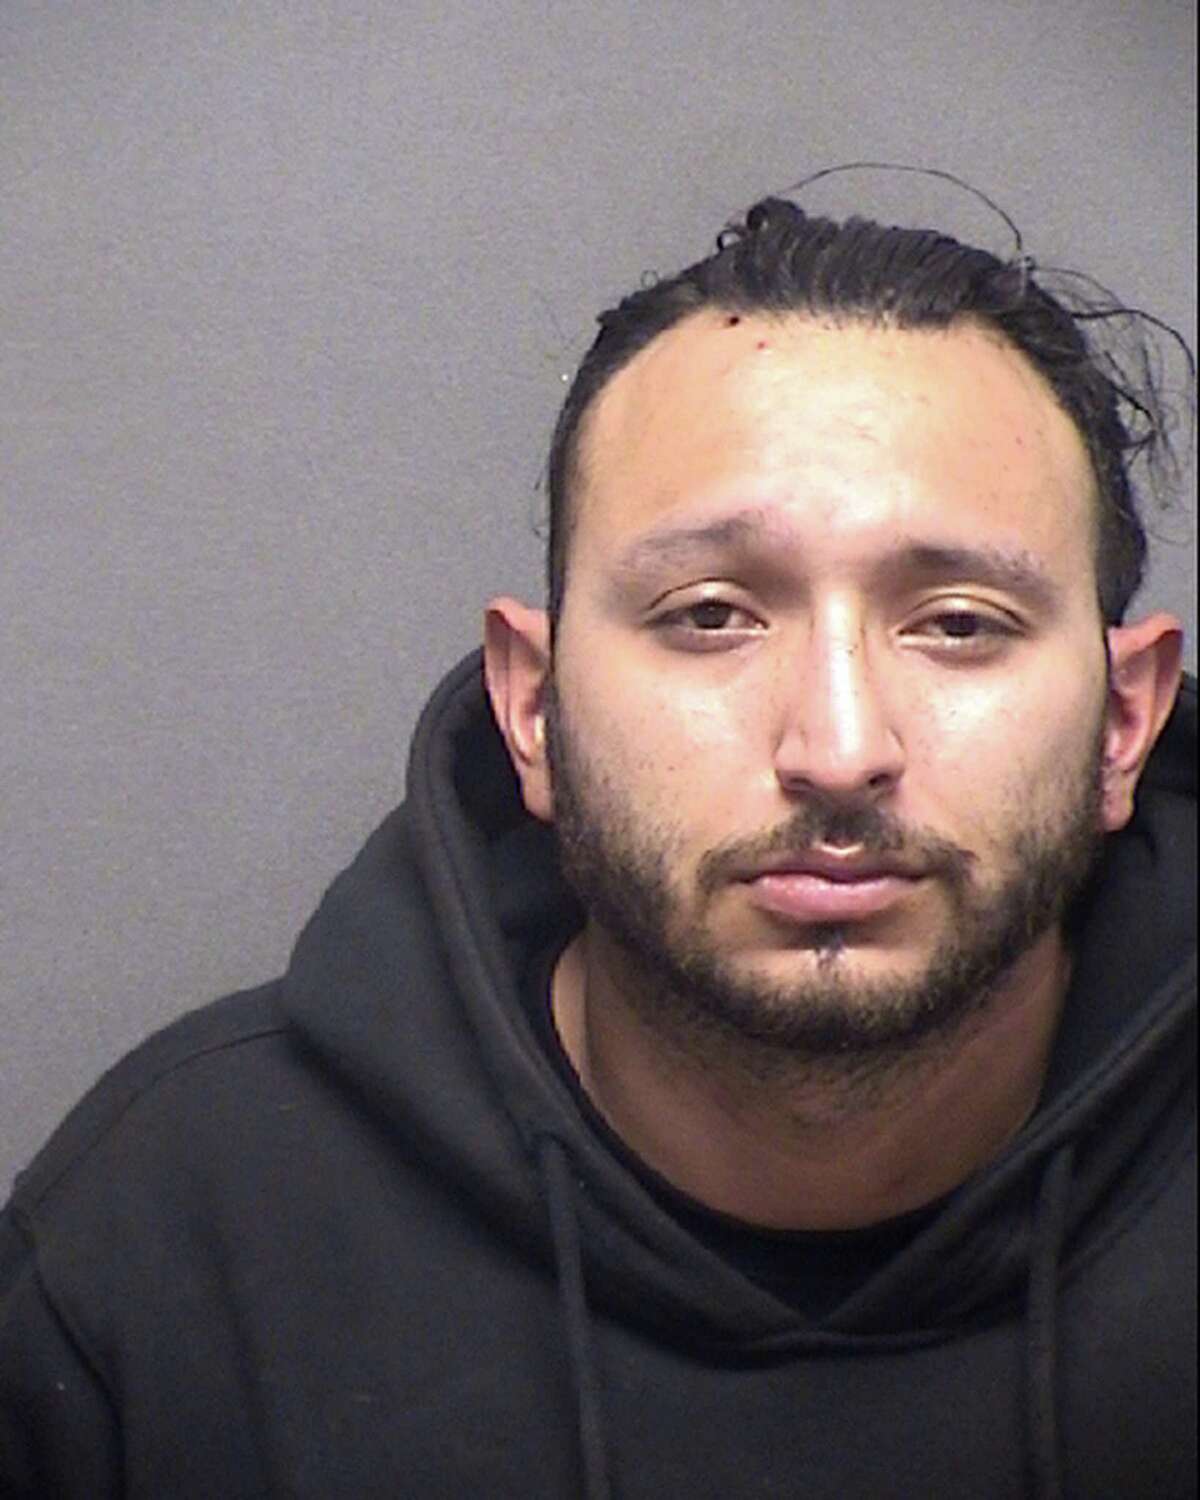 Christian Alexander Moreno, 31 is seen in a booking photo provided Feb. 25by the Bexar County Sheriff’s Department. Moreno is facing felony charges of attack by dangerous dog causing death and injury to an elderly person, the San Antonio Police Department said in a Facebook post.